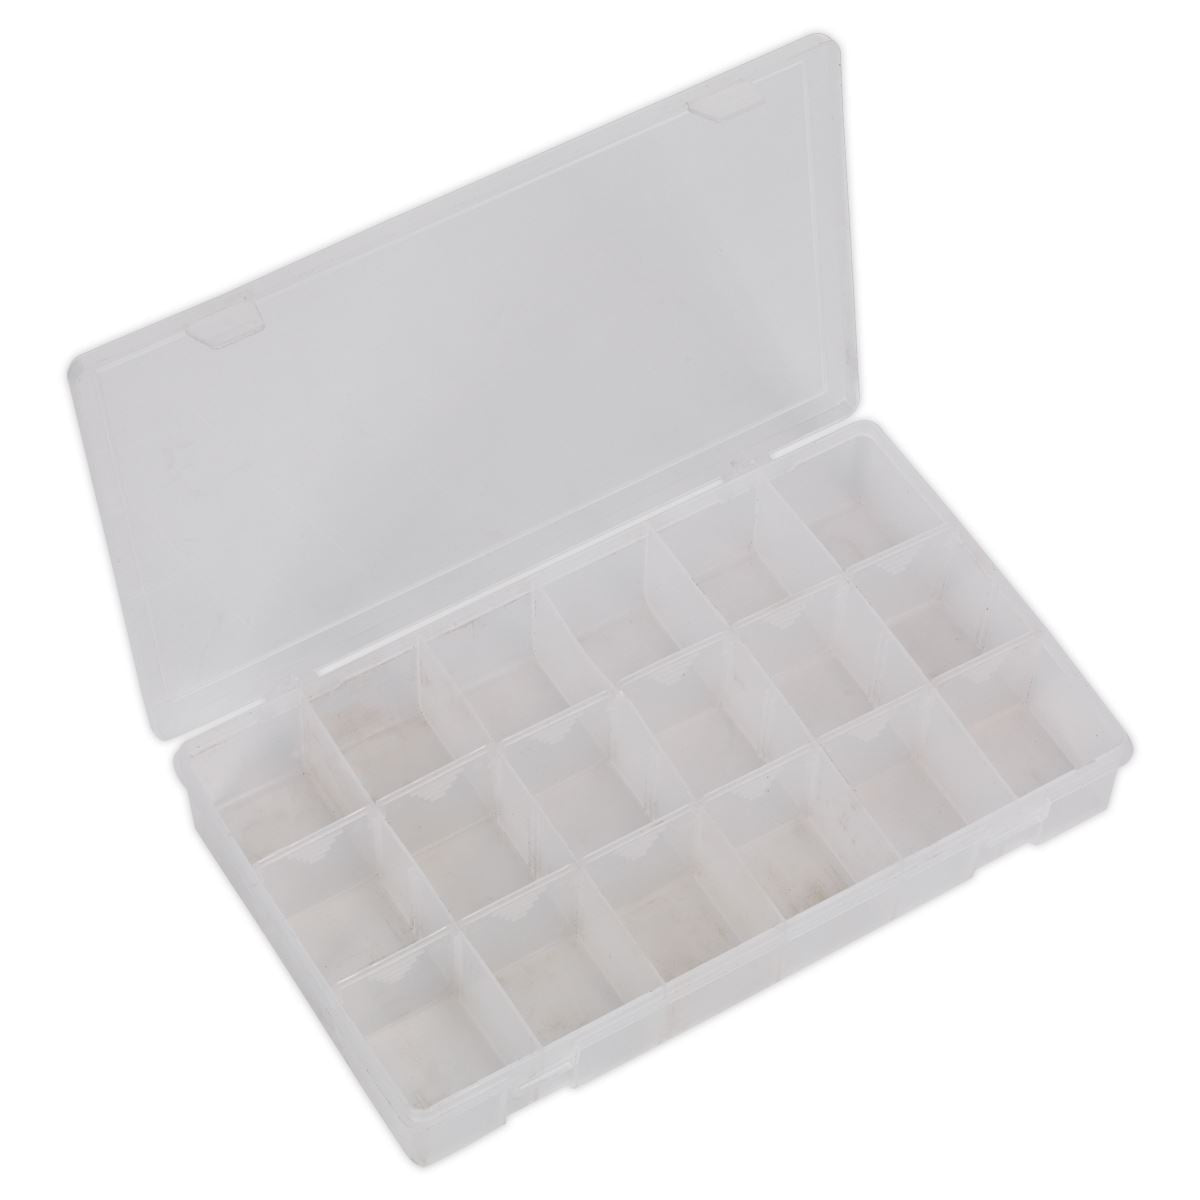 Sealey Assortment Box with 12 Removable Dividers